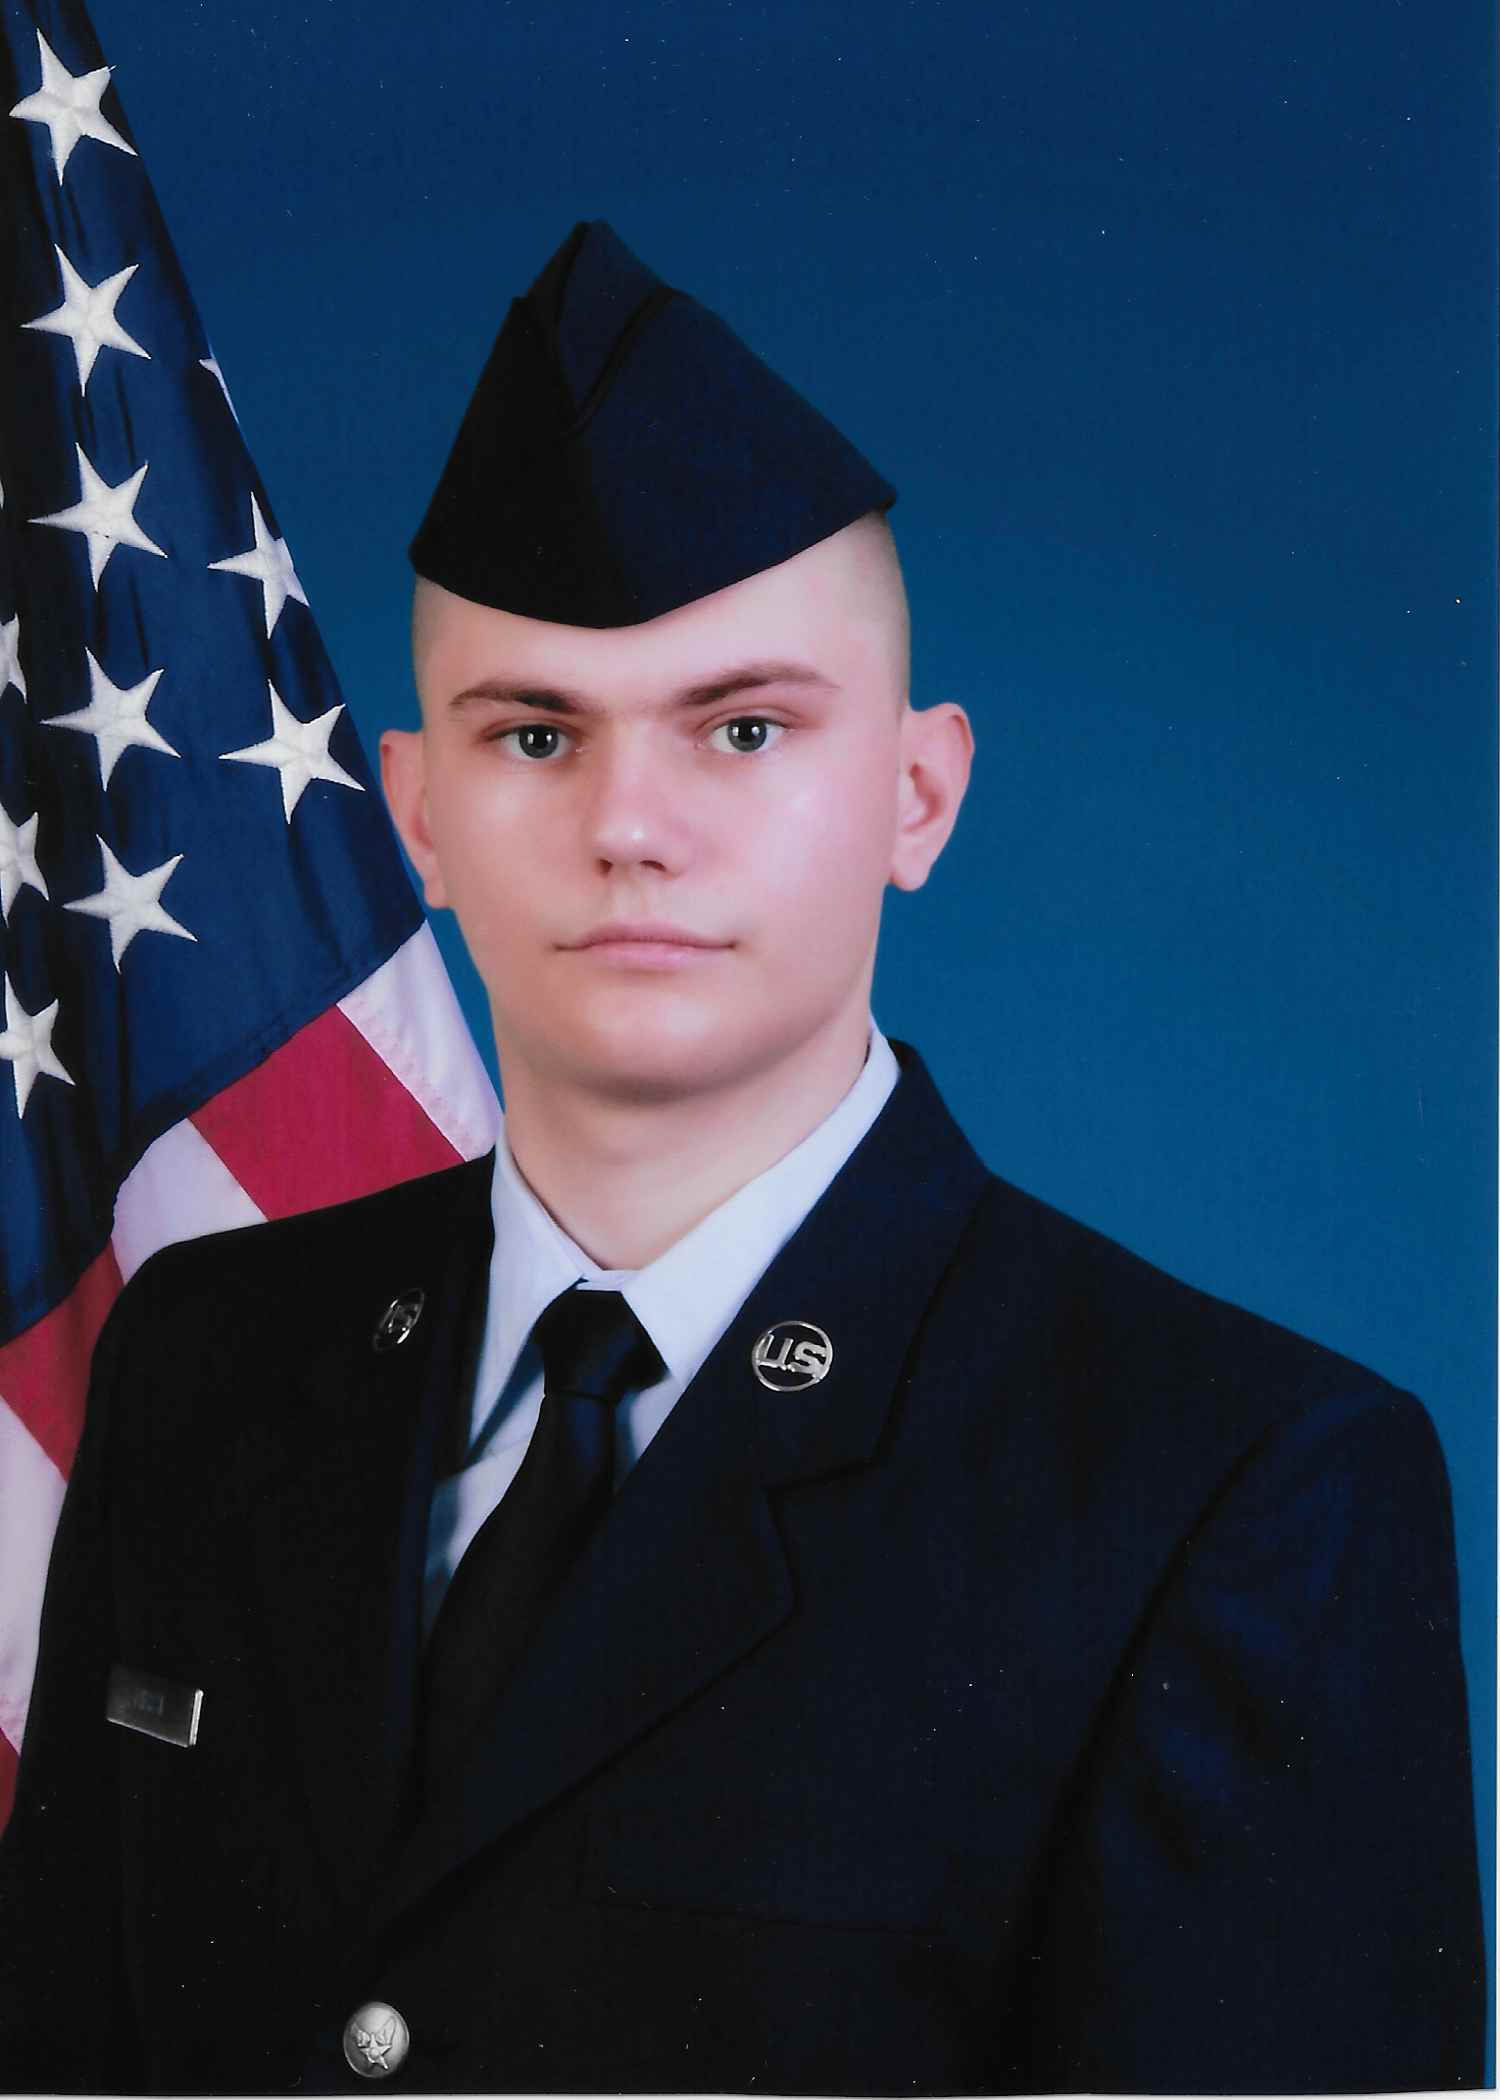 Methuen’s Airman 1st Class Travis W. Hirst Completes Basic Training with the Air Force